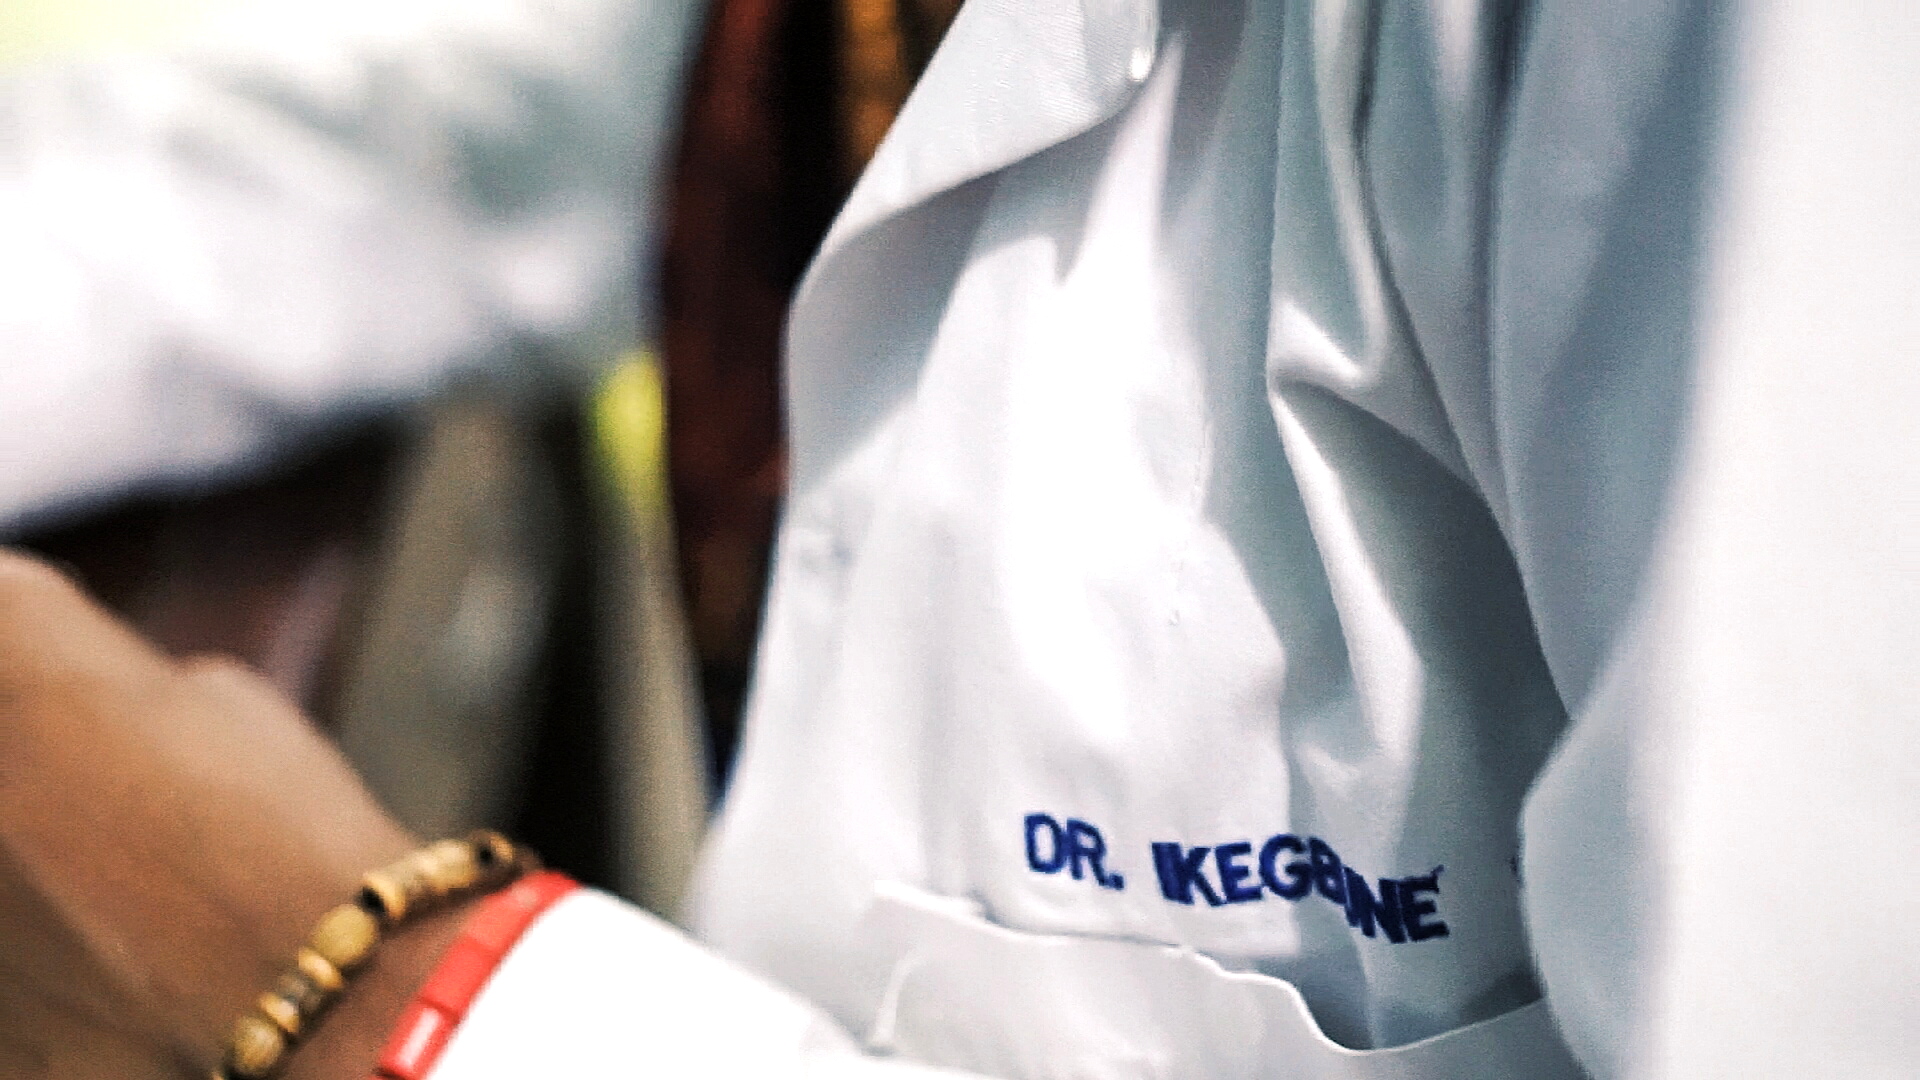 Housemanship in Nigeria - Nigerian medical doctor and blogger Cassie daves 